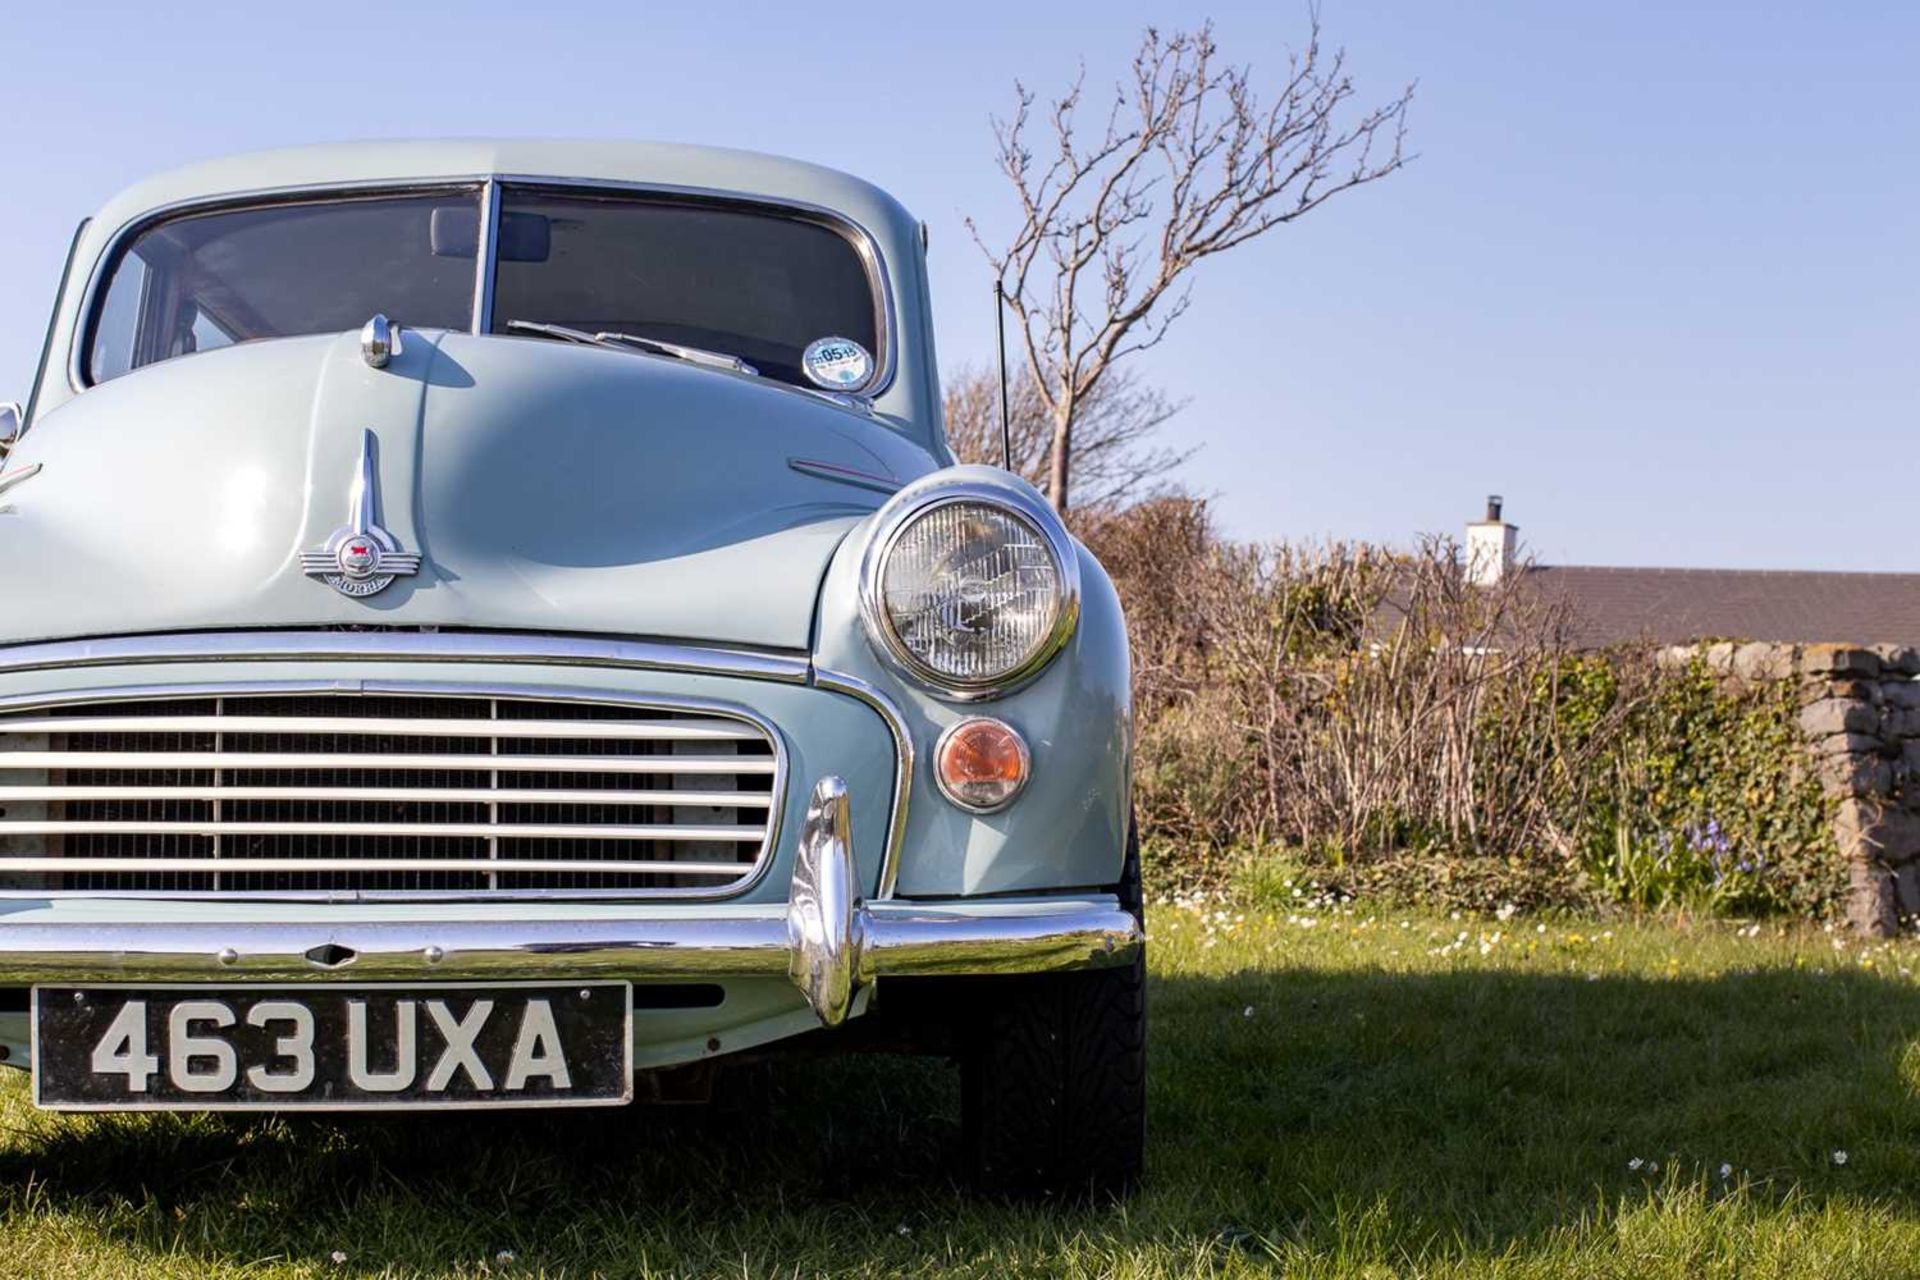 1956 Morris Minor Traveller Uprated with 1275cc engine  - Image 33 of 89